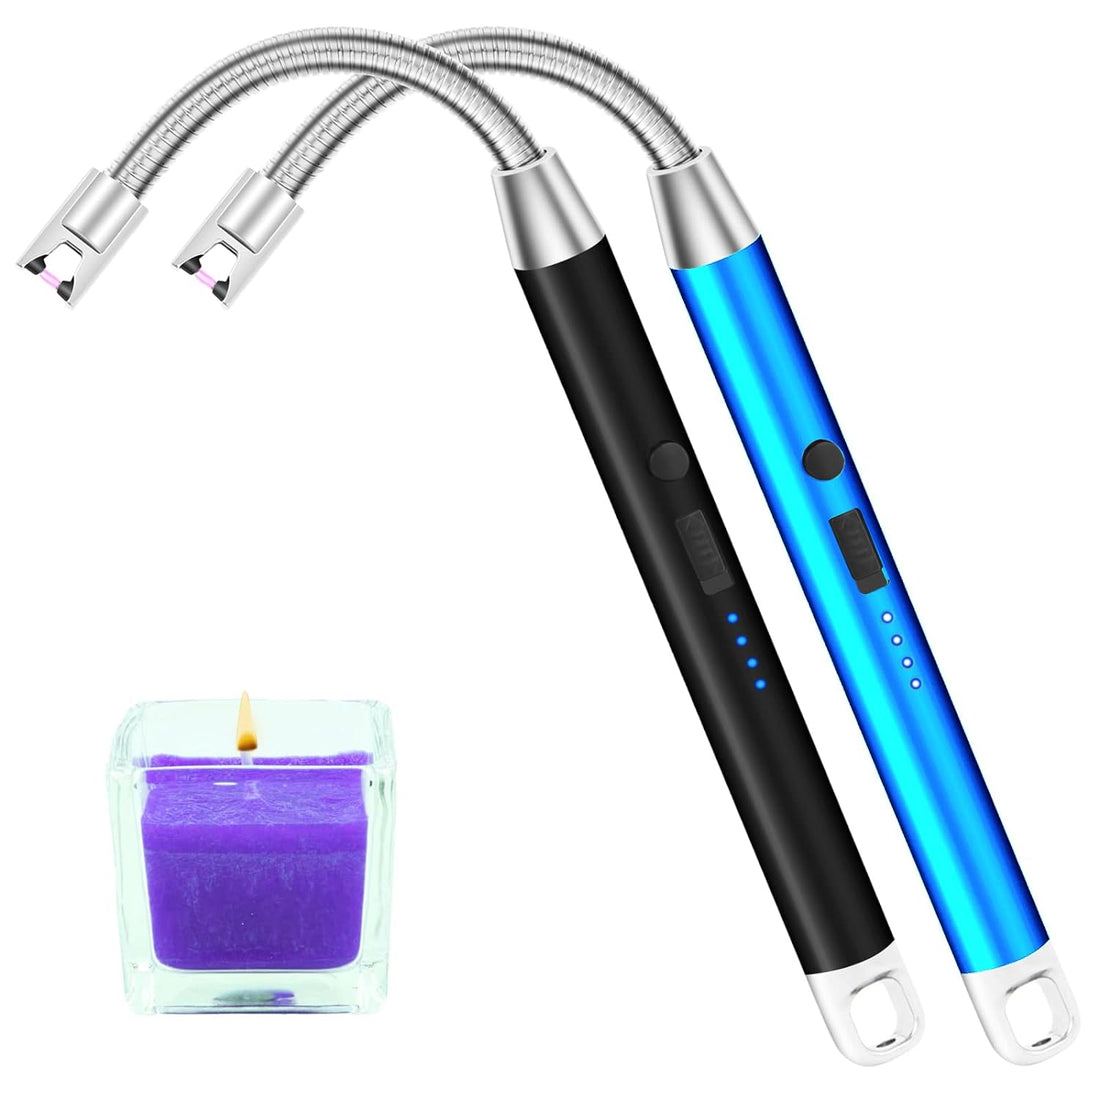 SHENG YU FAN Candle Lighter 2Pack Electric USB Rechargeable arc Plasma with LED Battery Display Safety Switch Power Indicator,Longer Flexible Neck for Camping Cooking BBQs Fireworks, Black & Blue